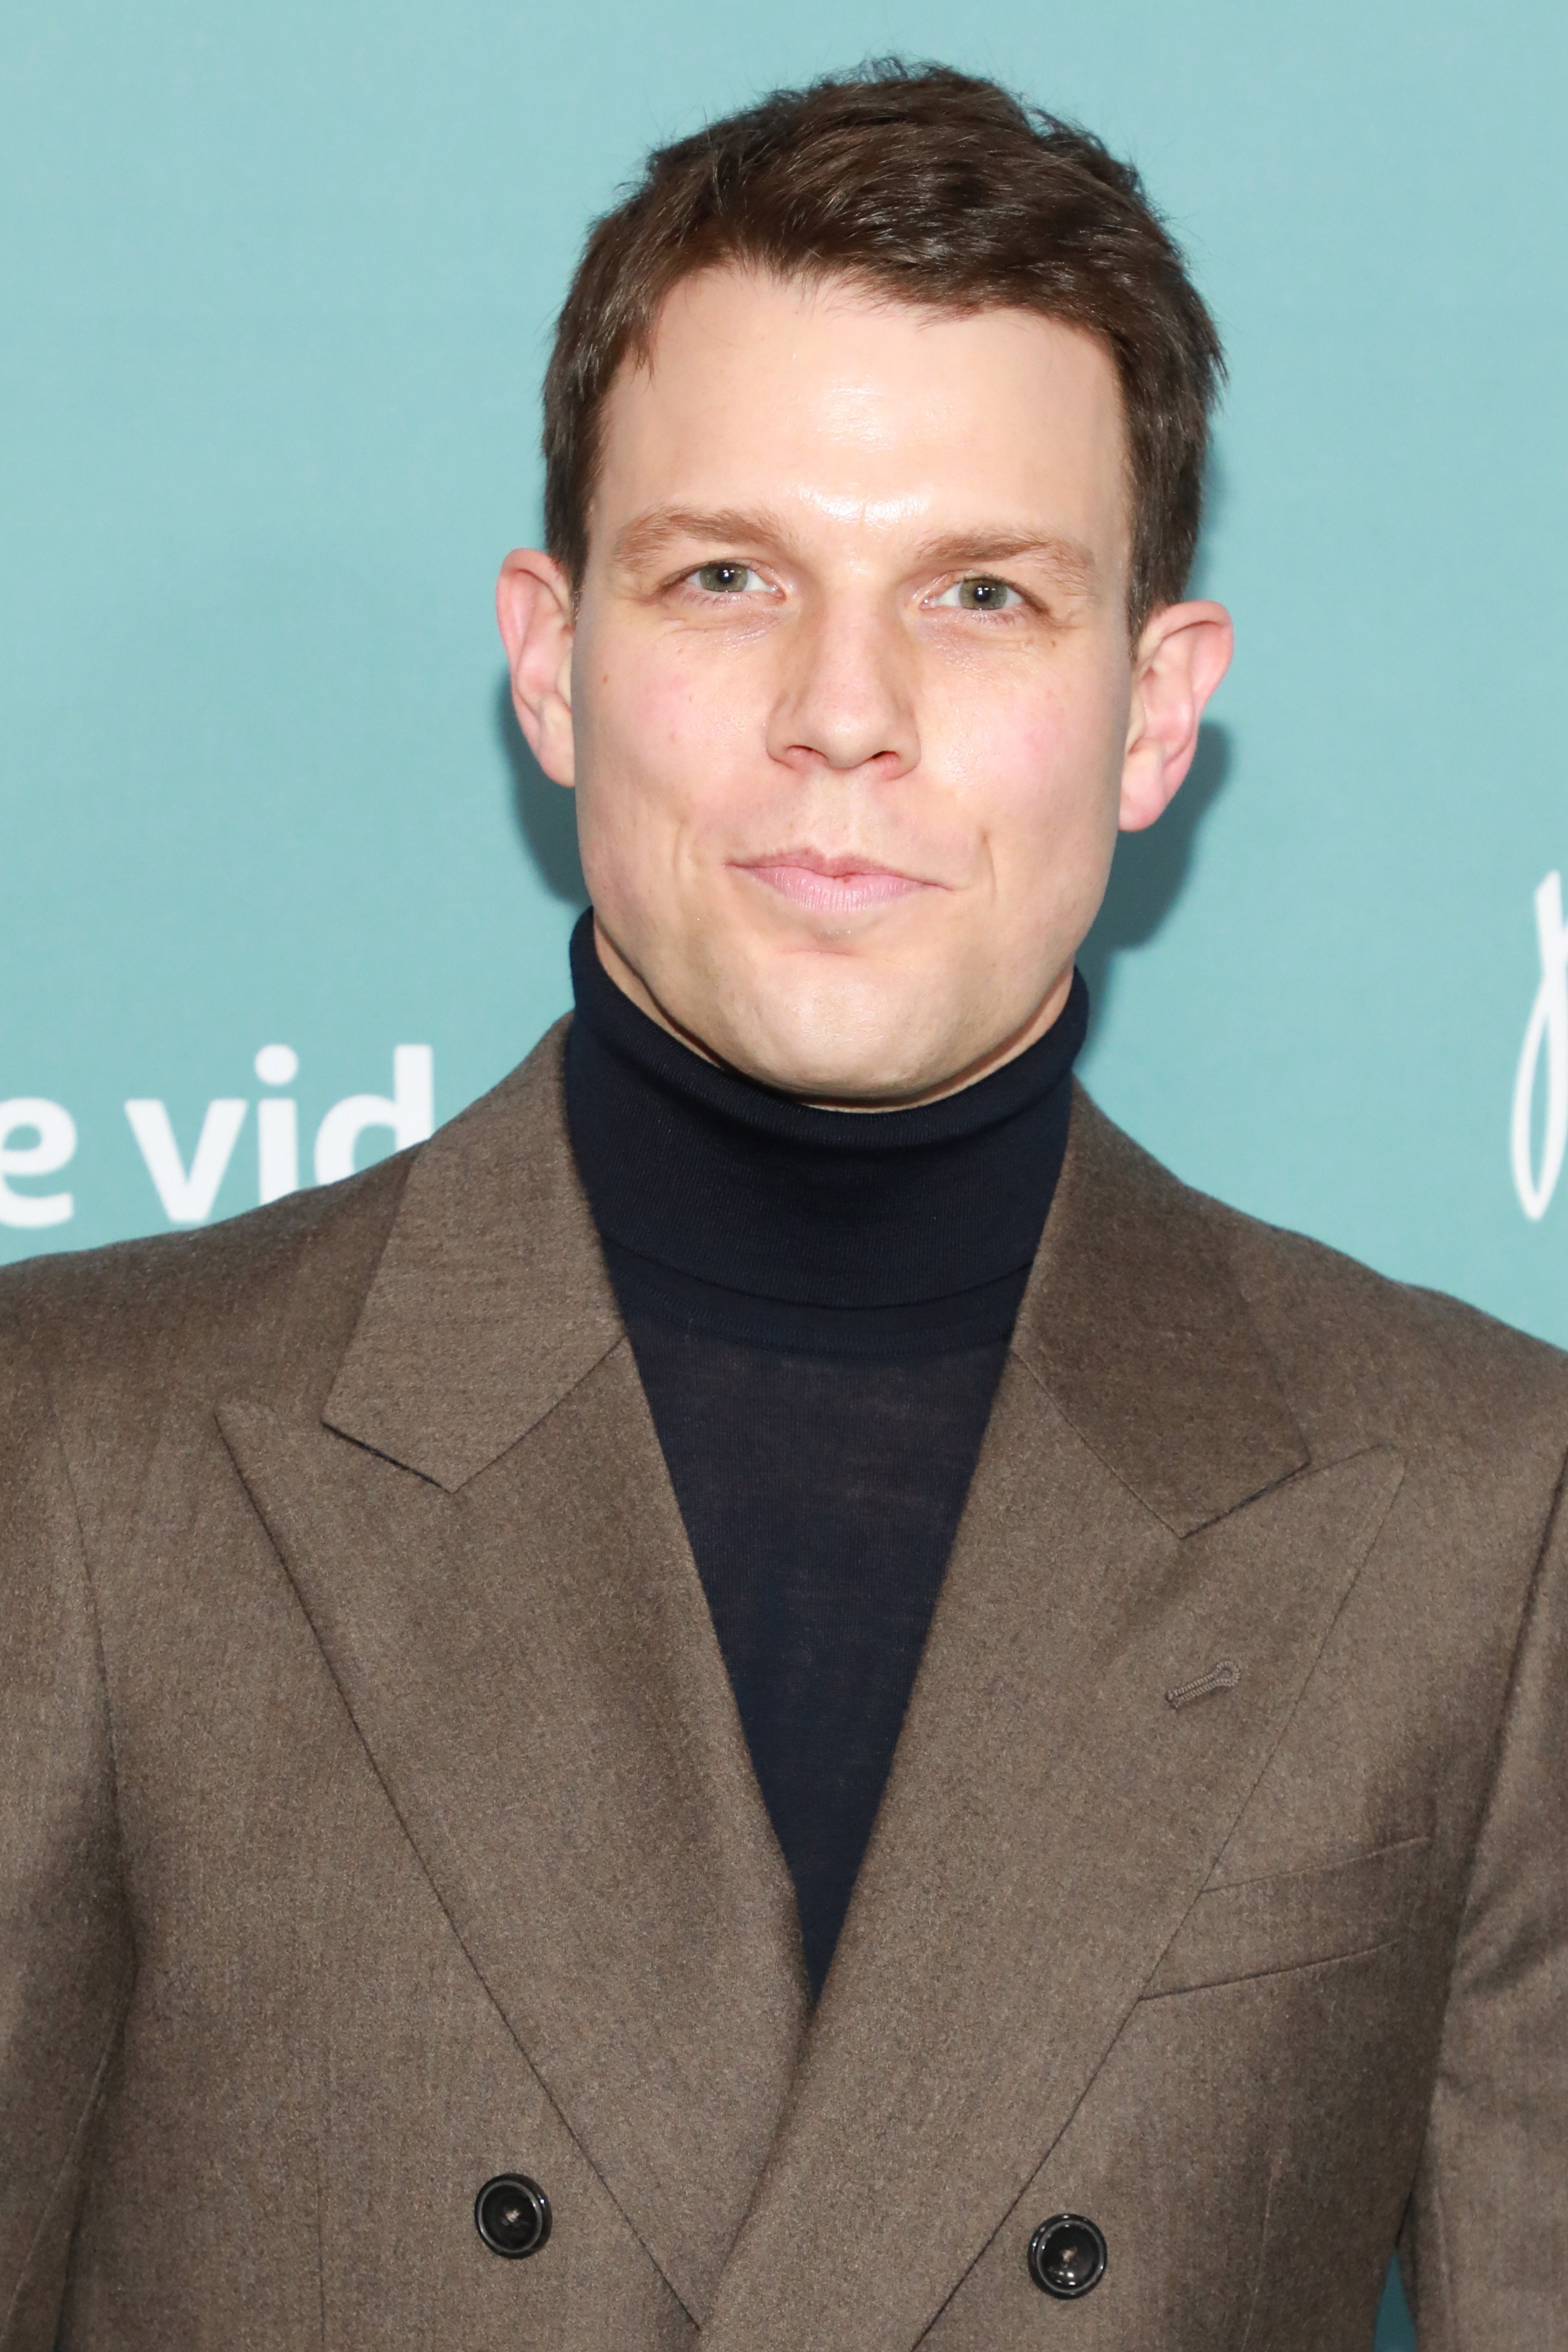 Jake Lacy’s Wife Lauren Deleo A Look into Their Relationship since